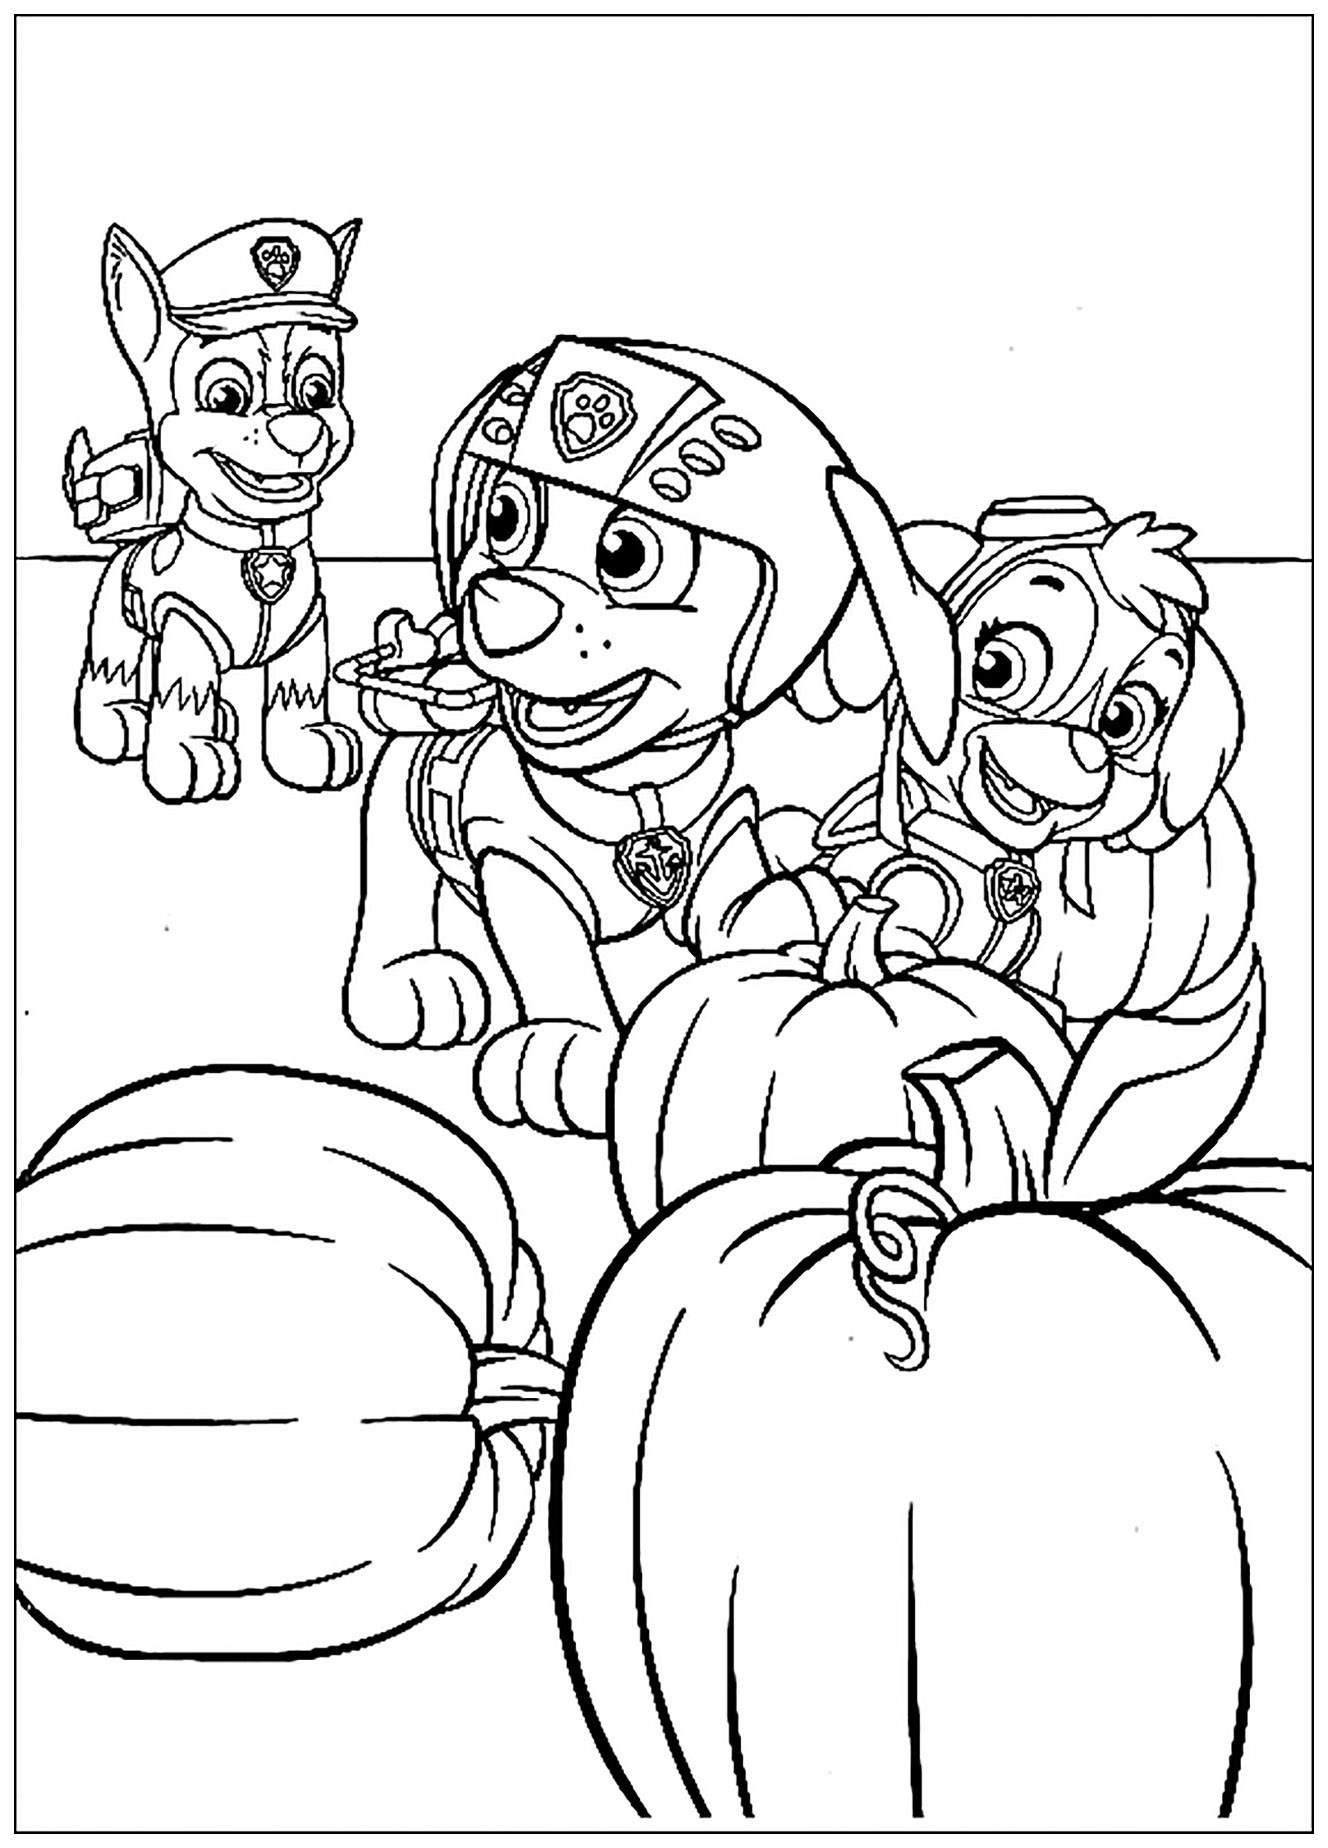 Paw patrol to color for kids - Paw Patrol Kids Coloring Pages